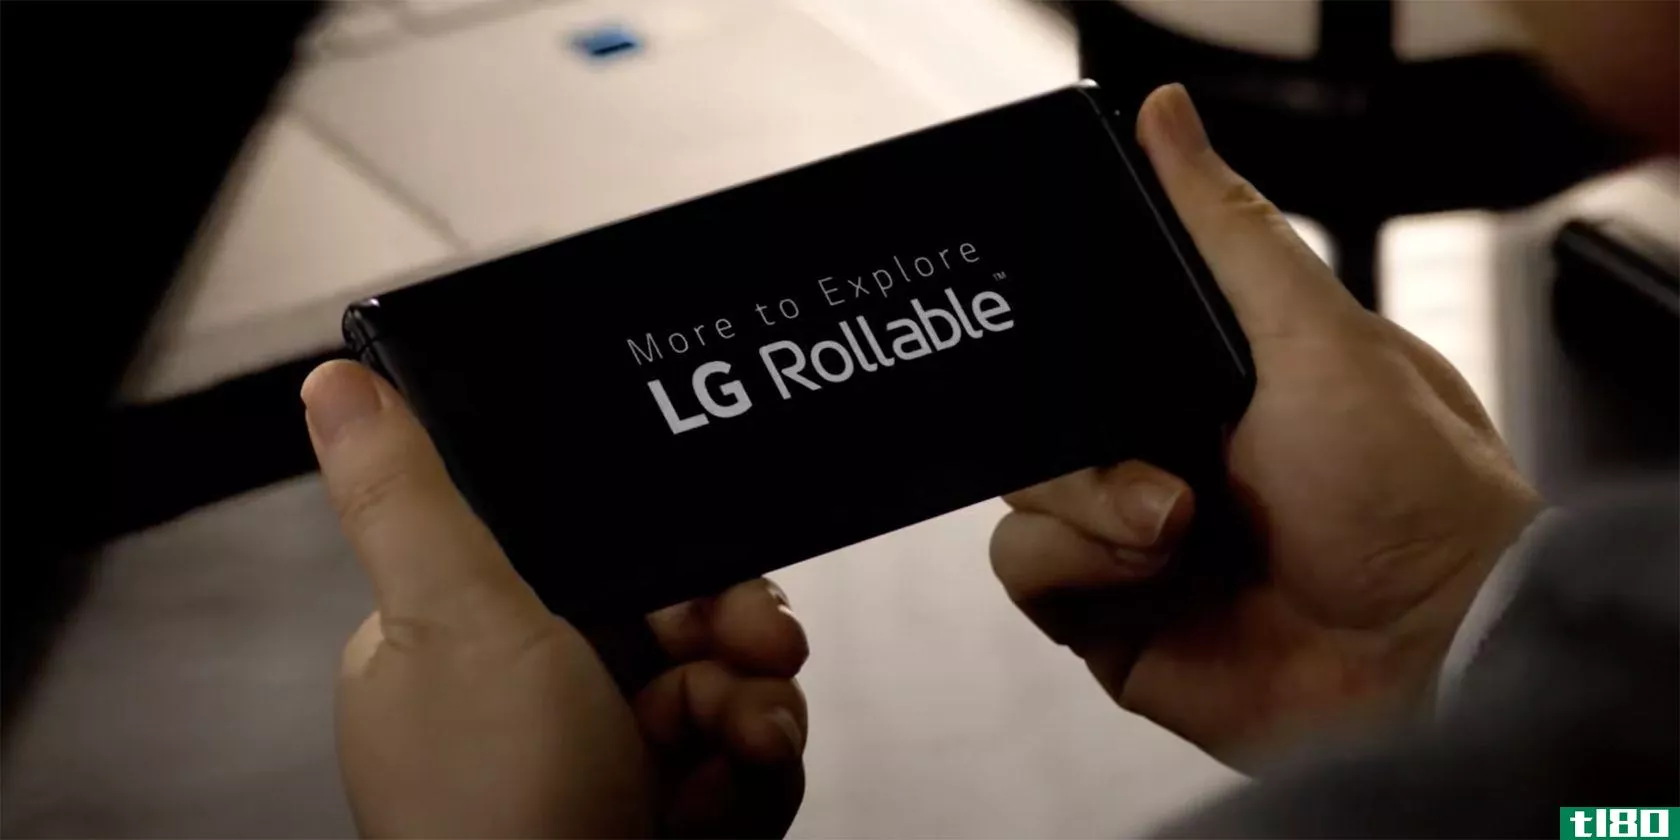 LG Rollable Tease